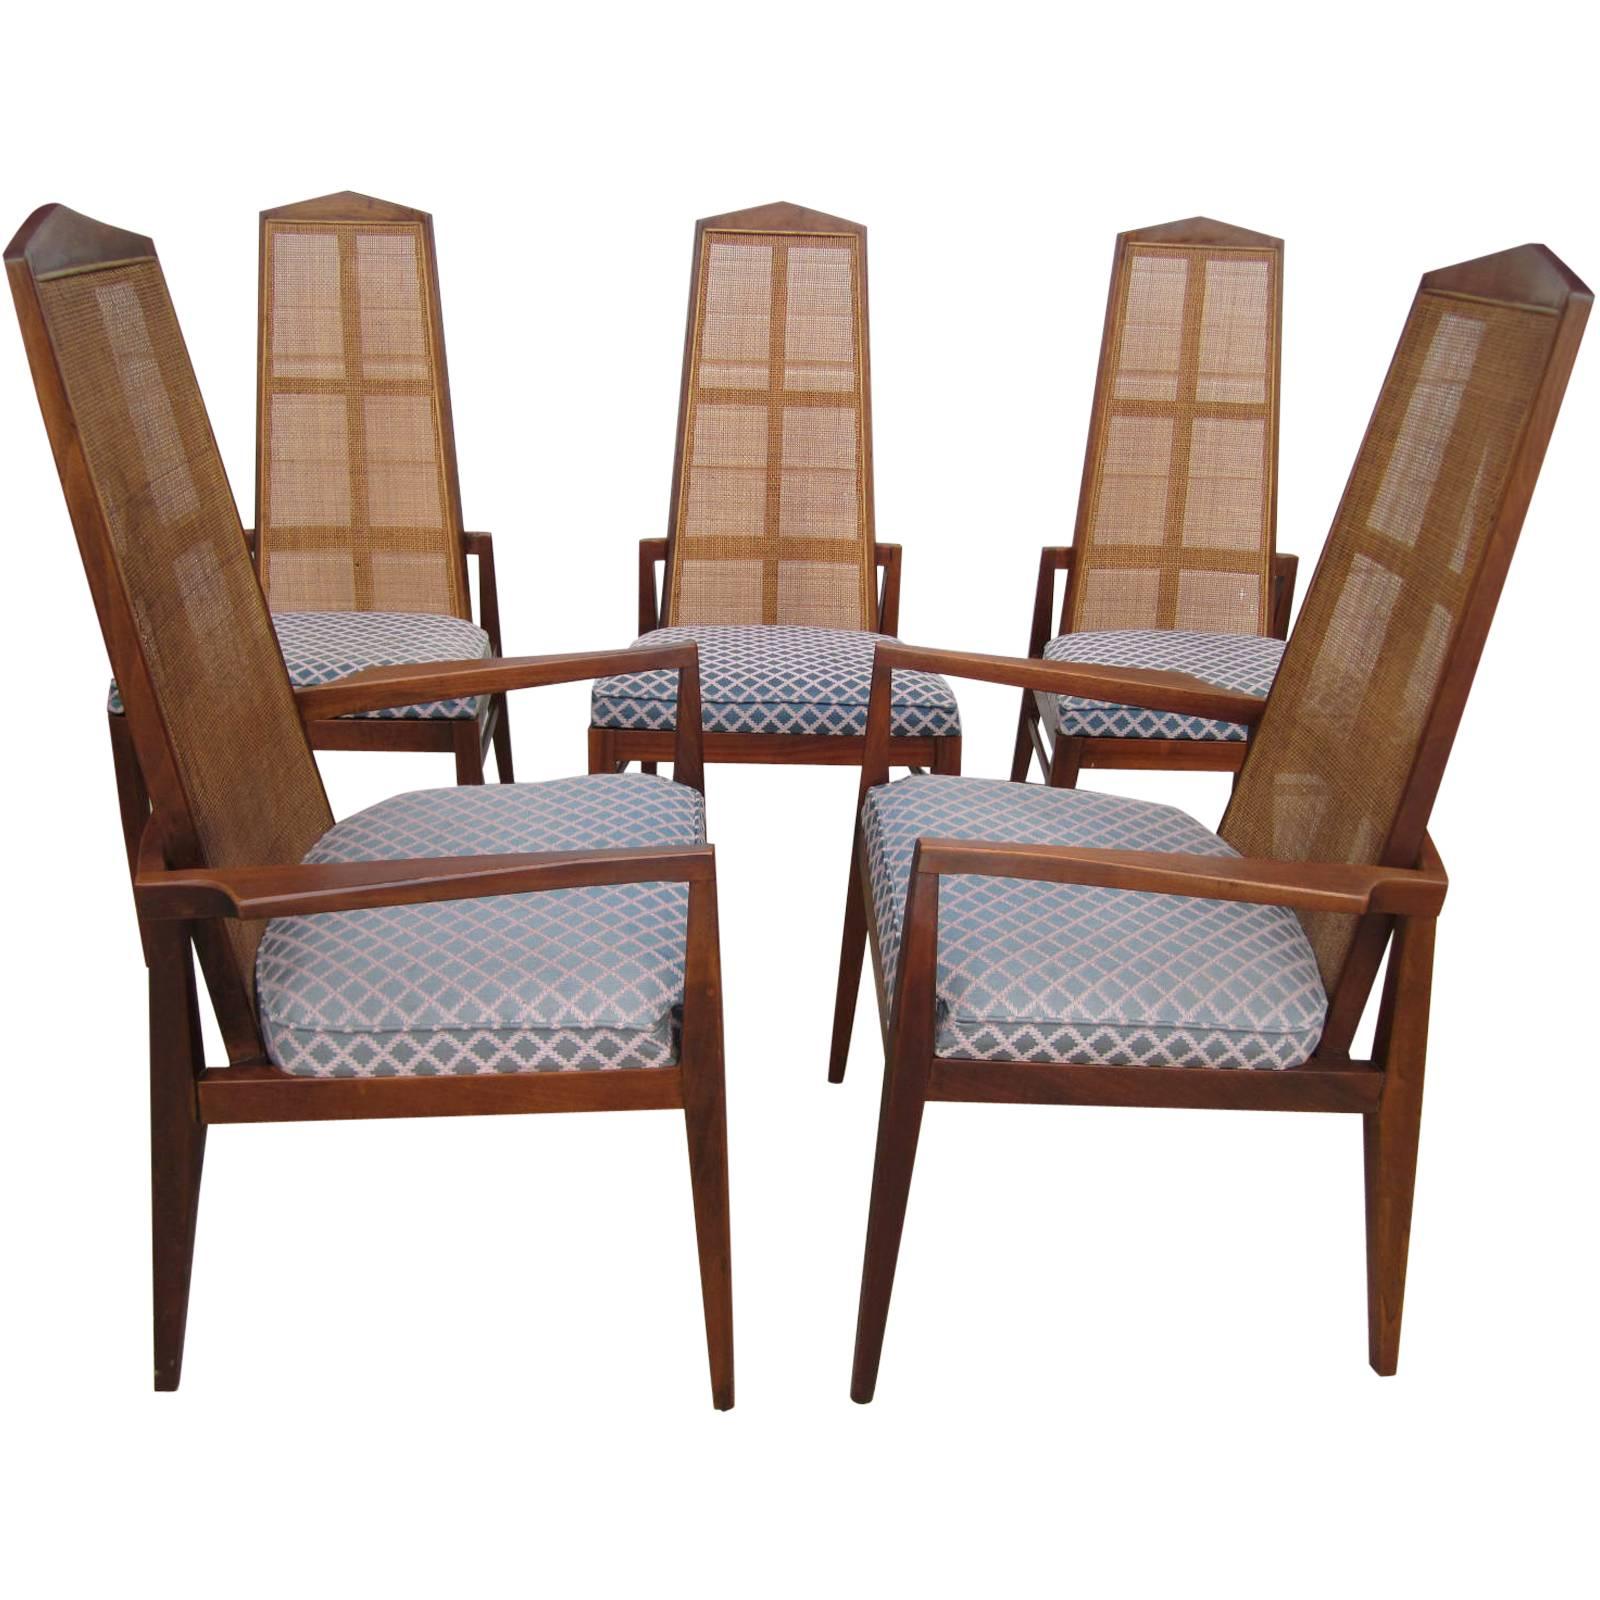 5 Walnut Foster and McDavid Cane-Back Dining Chairs, Mid-Century Modern